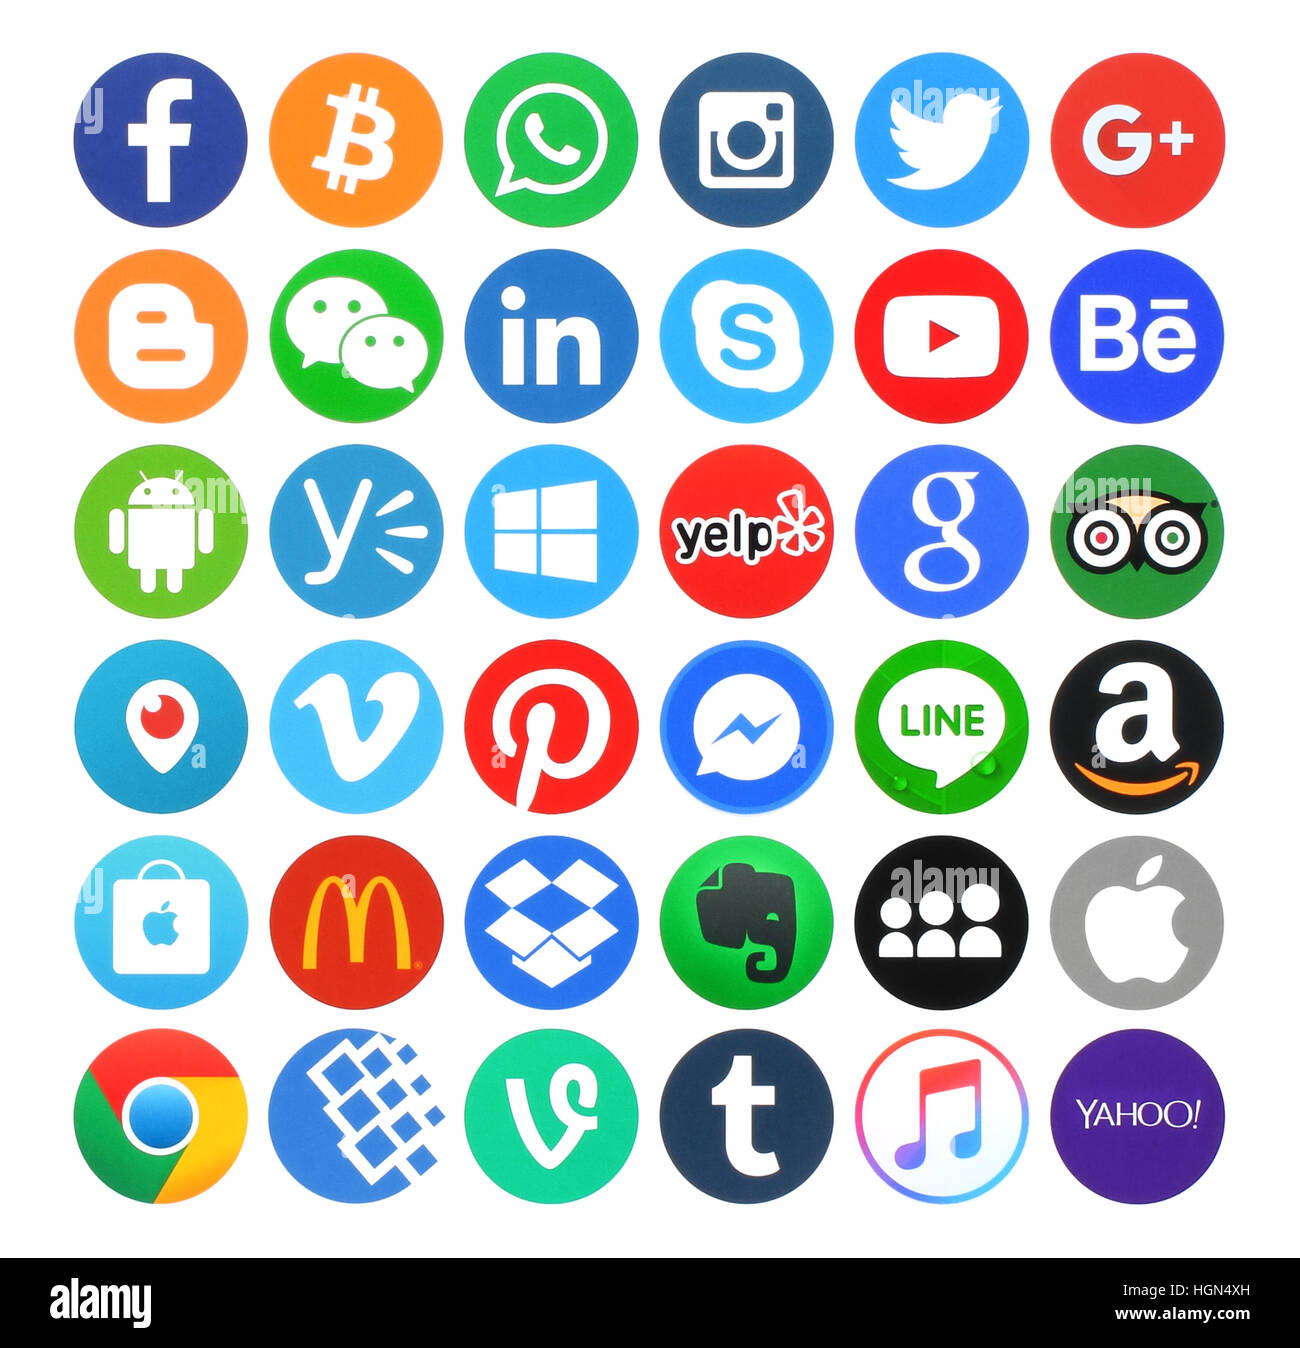 Kiev, Ukraine - May 14, 2016: Collection of popular 36 round icons, printed on paper, of social networking, productivity, food, travel, music, operati Stock Photo